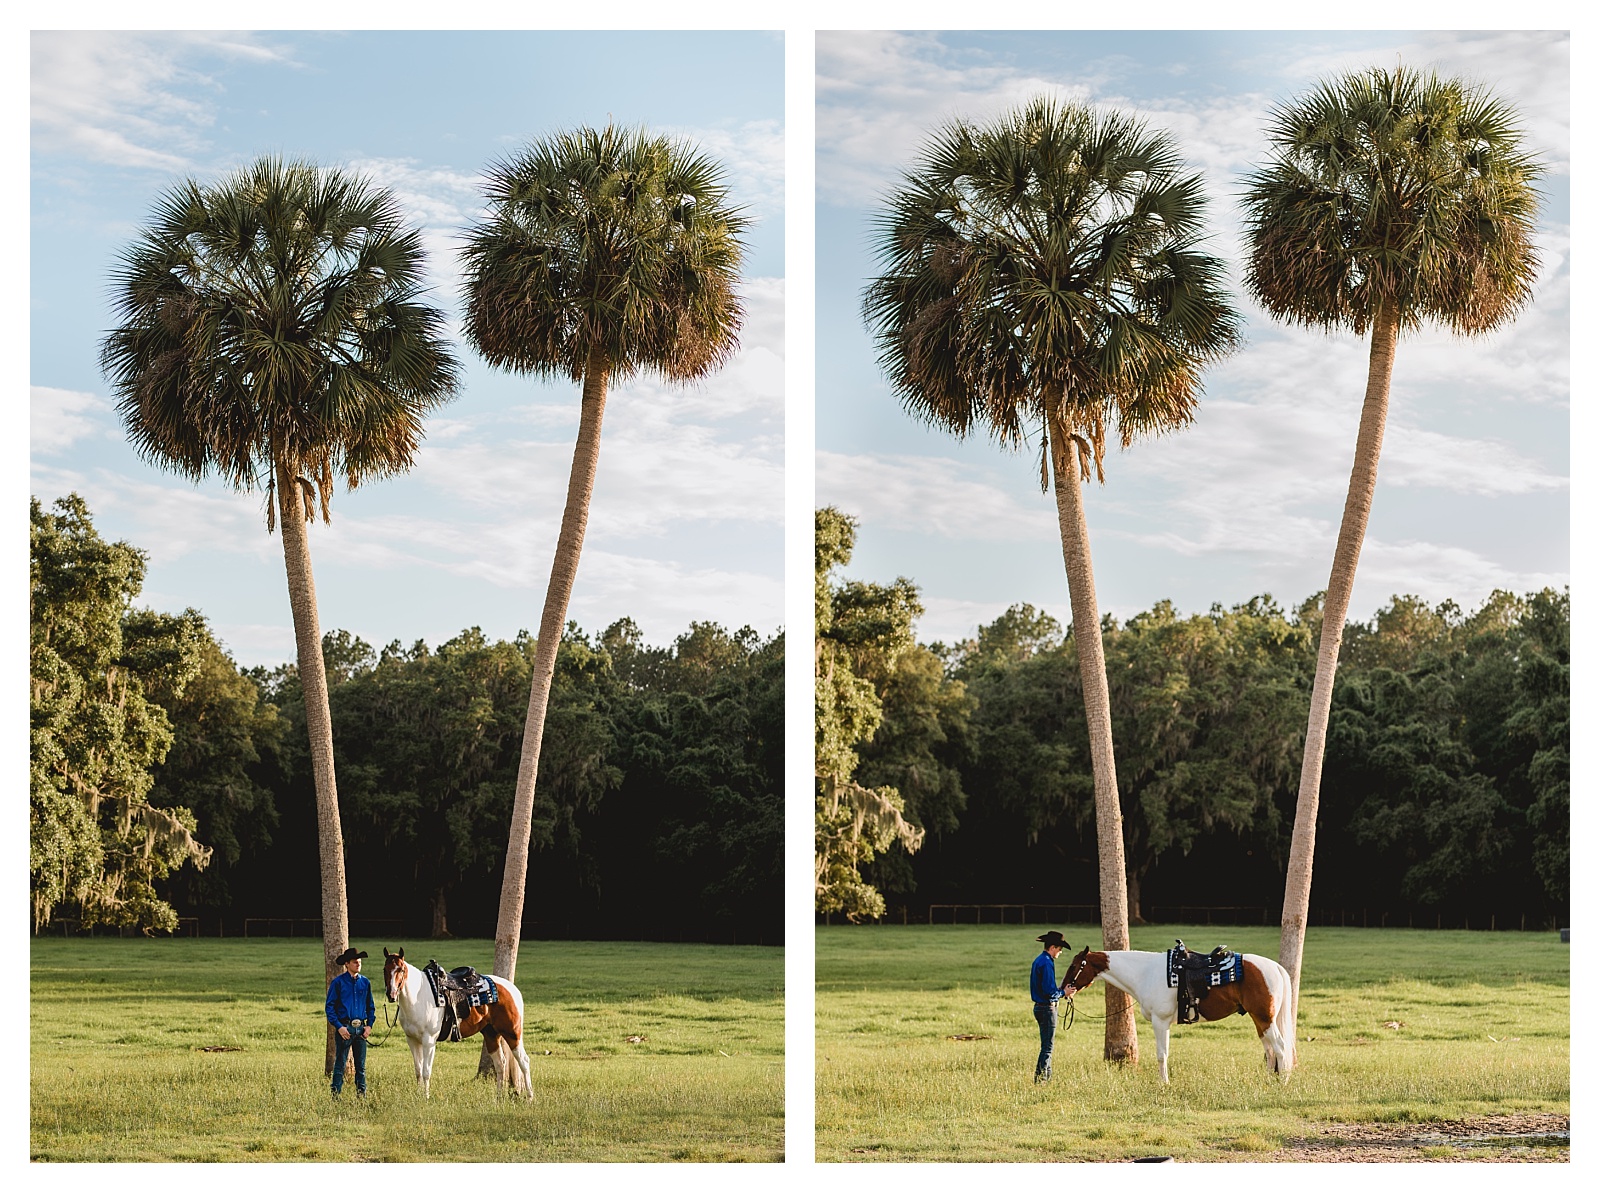 Photo of a Horse with palm trees in Florida.